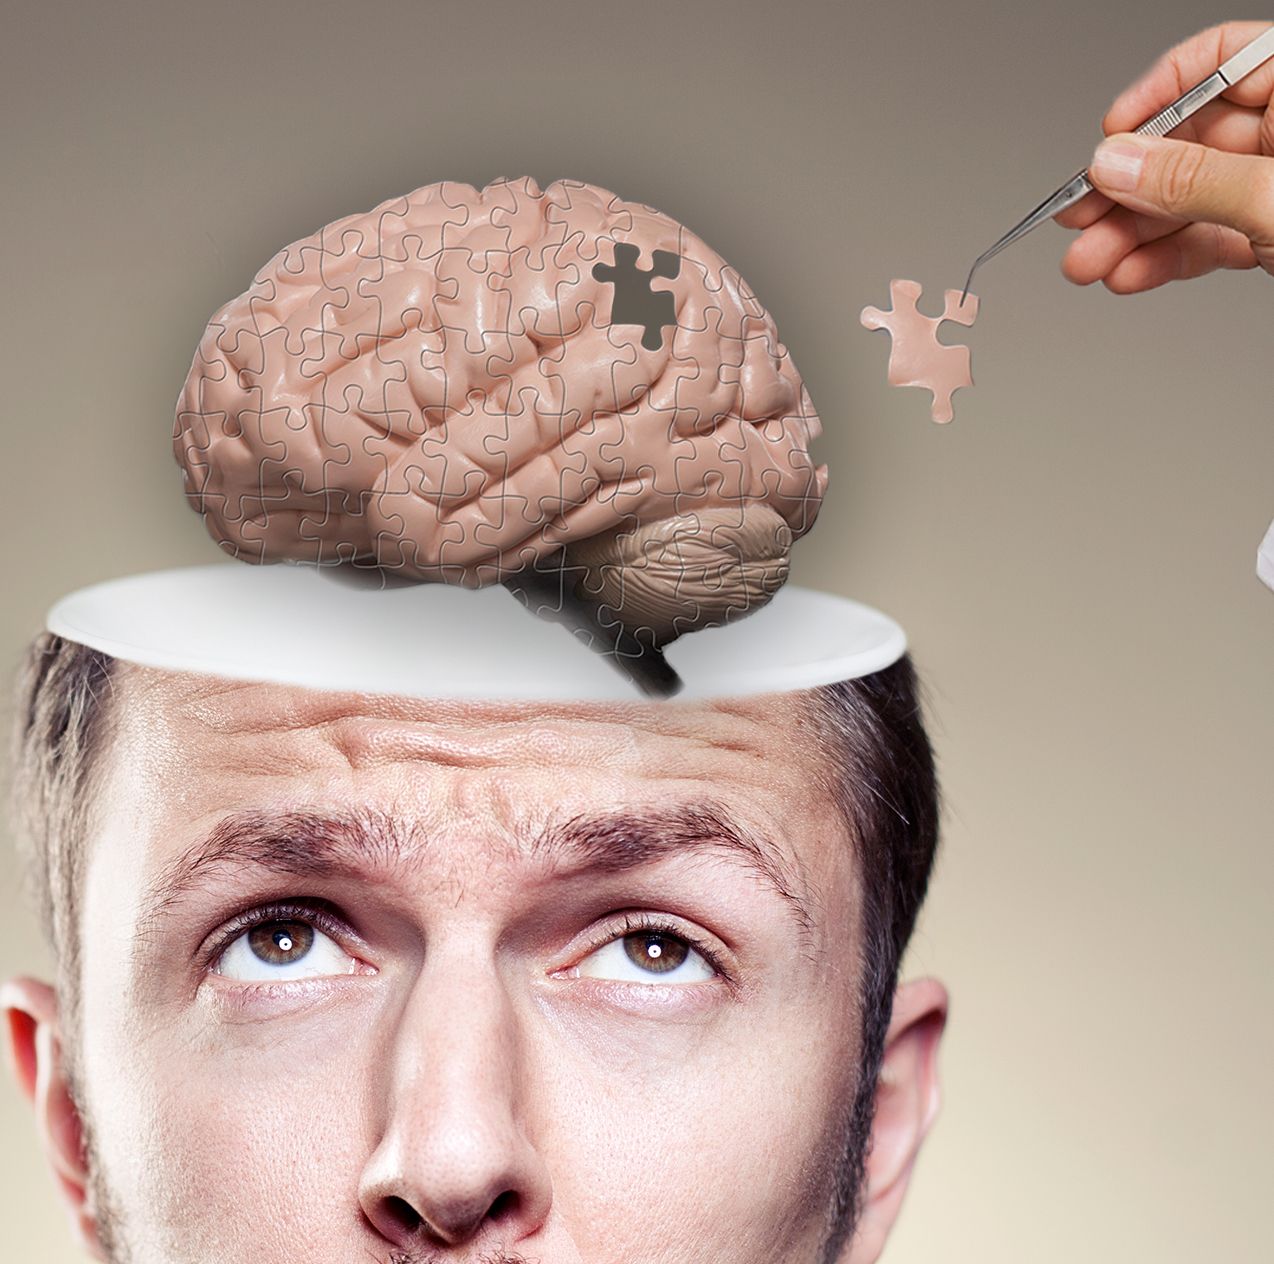 3 Astonishing Brain Facts That Will Blow Your Mind, According to a Neuroscientist